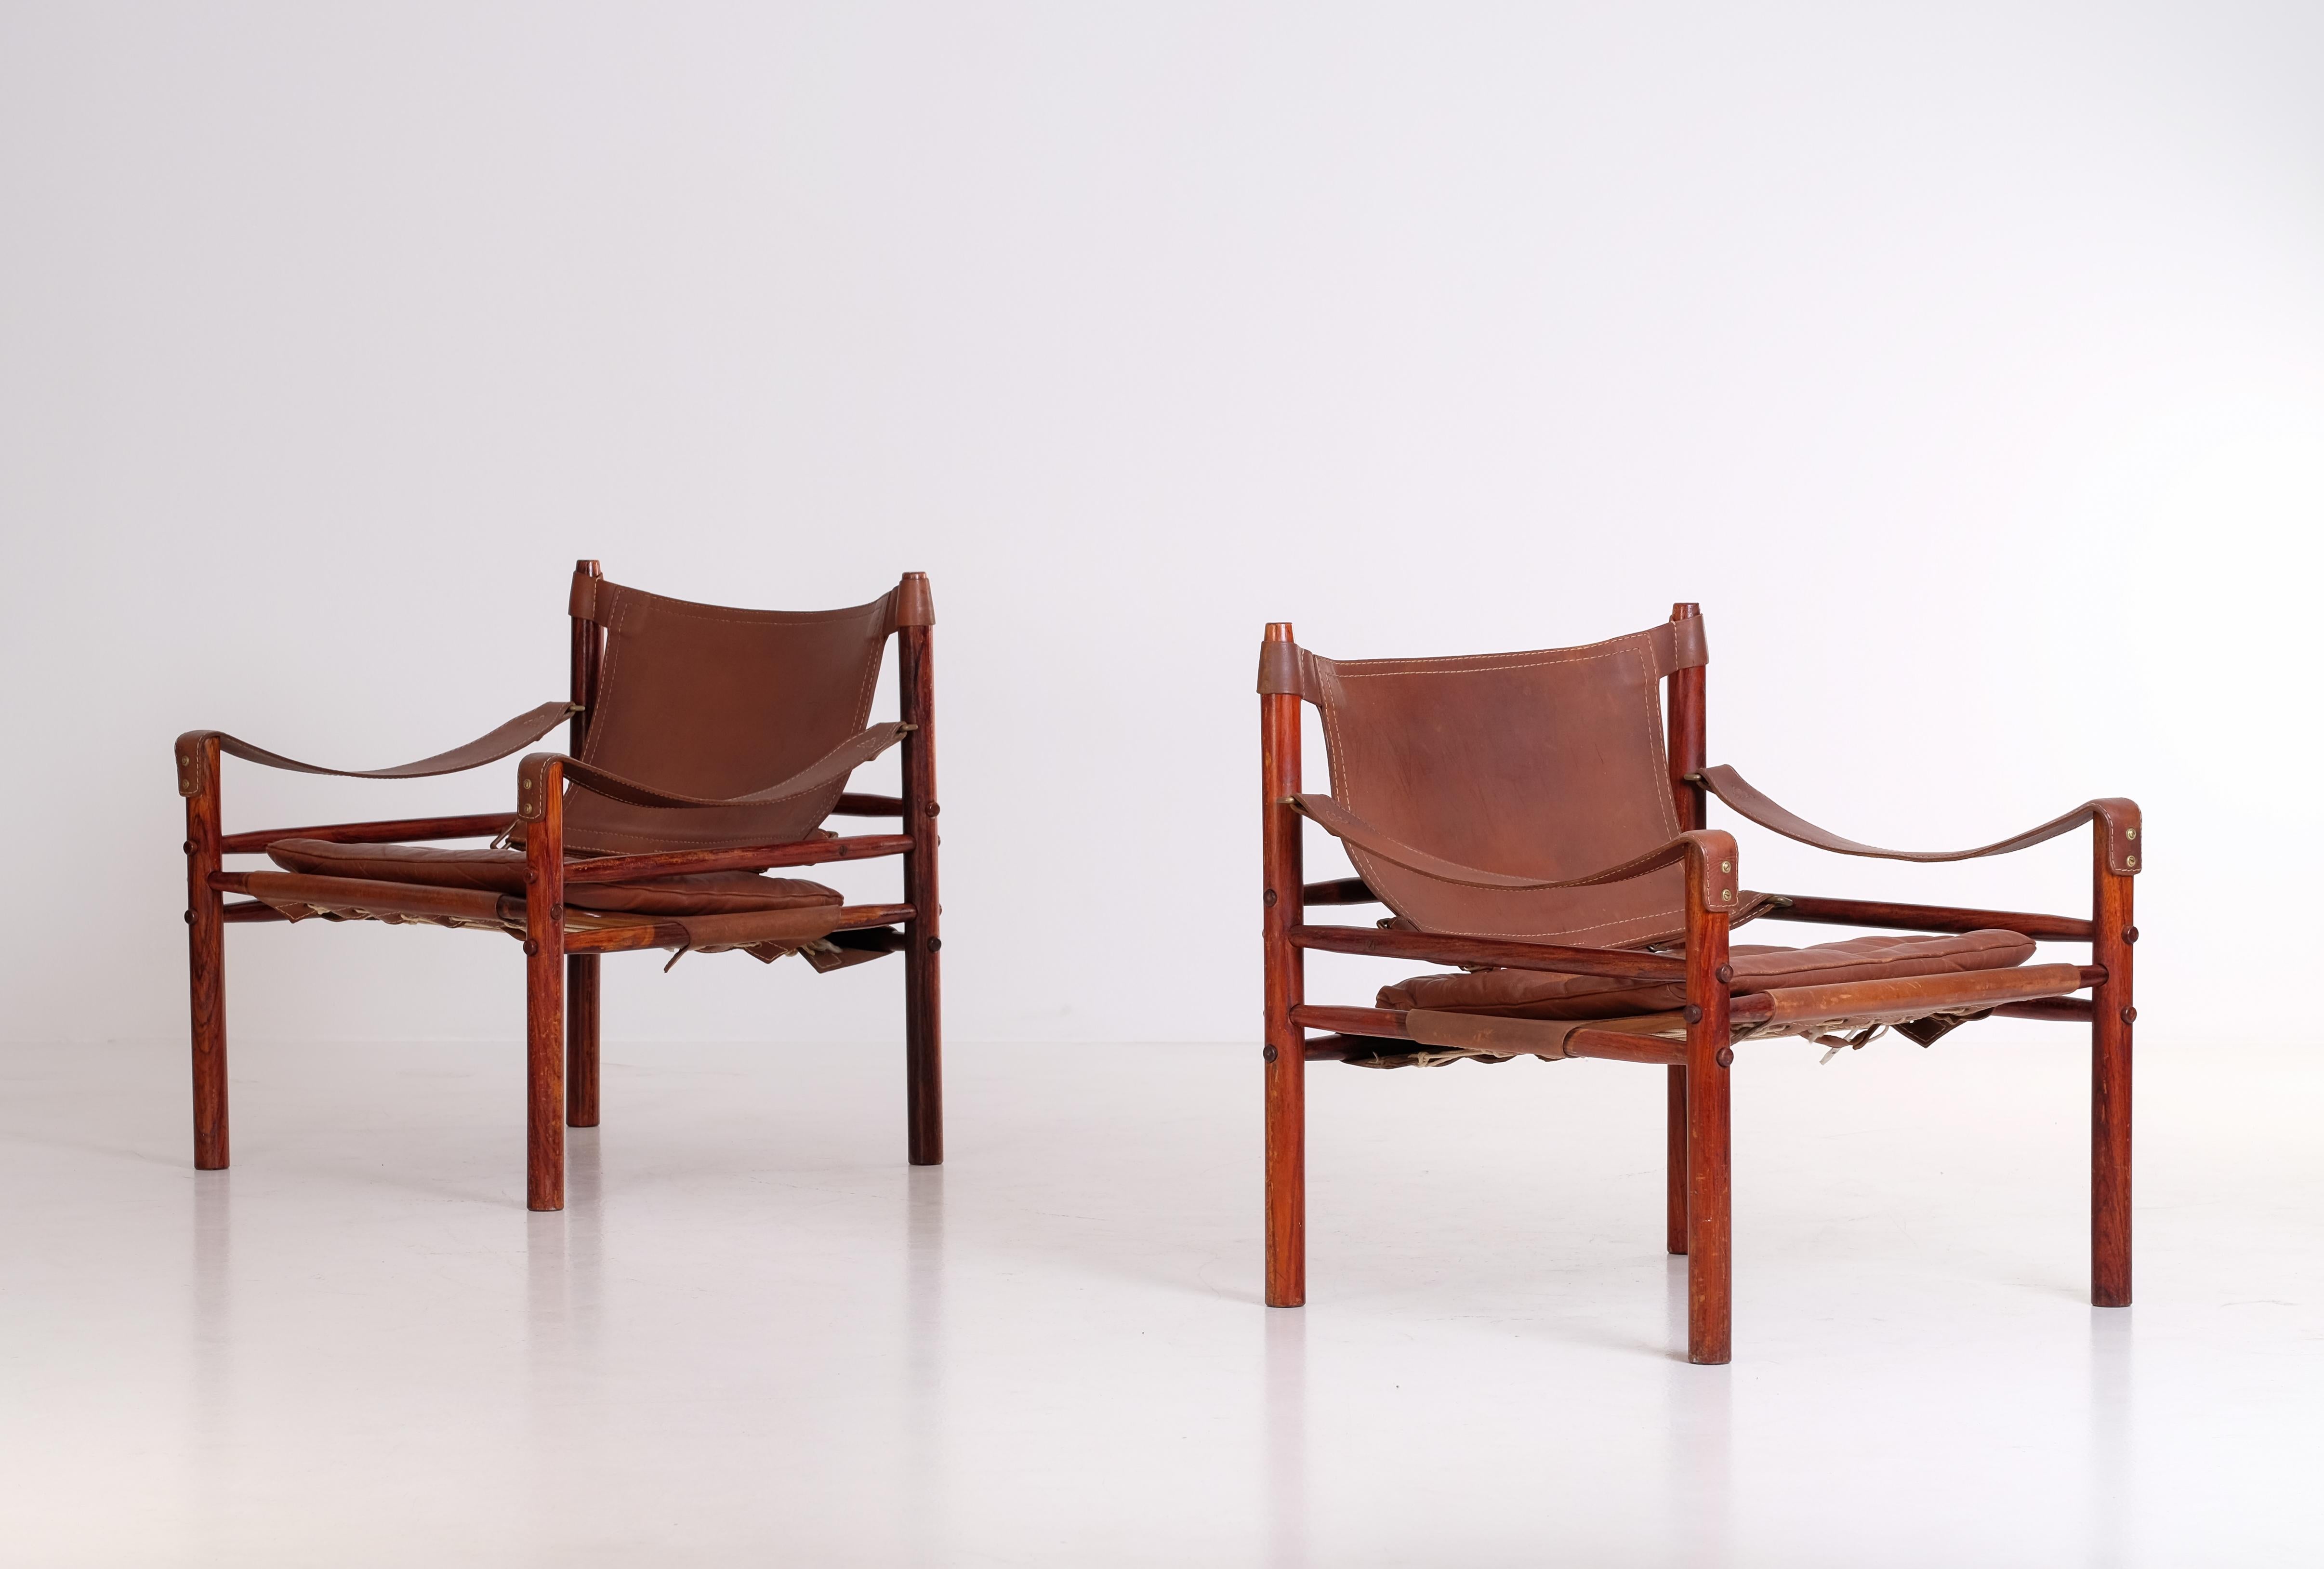 Pair of safari chairs model Sirocco in good condition with original leather.
Designed by Arne Norell, produced by Arne Norell AB in Aneby, Sweden, 1970s.
  




